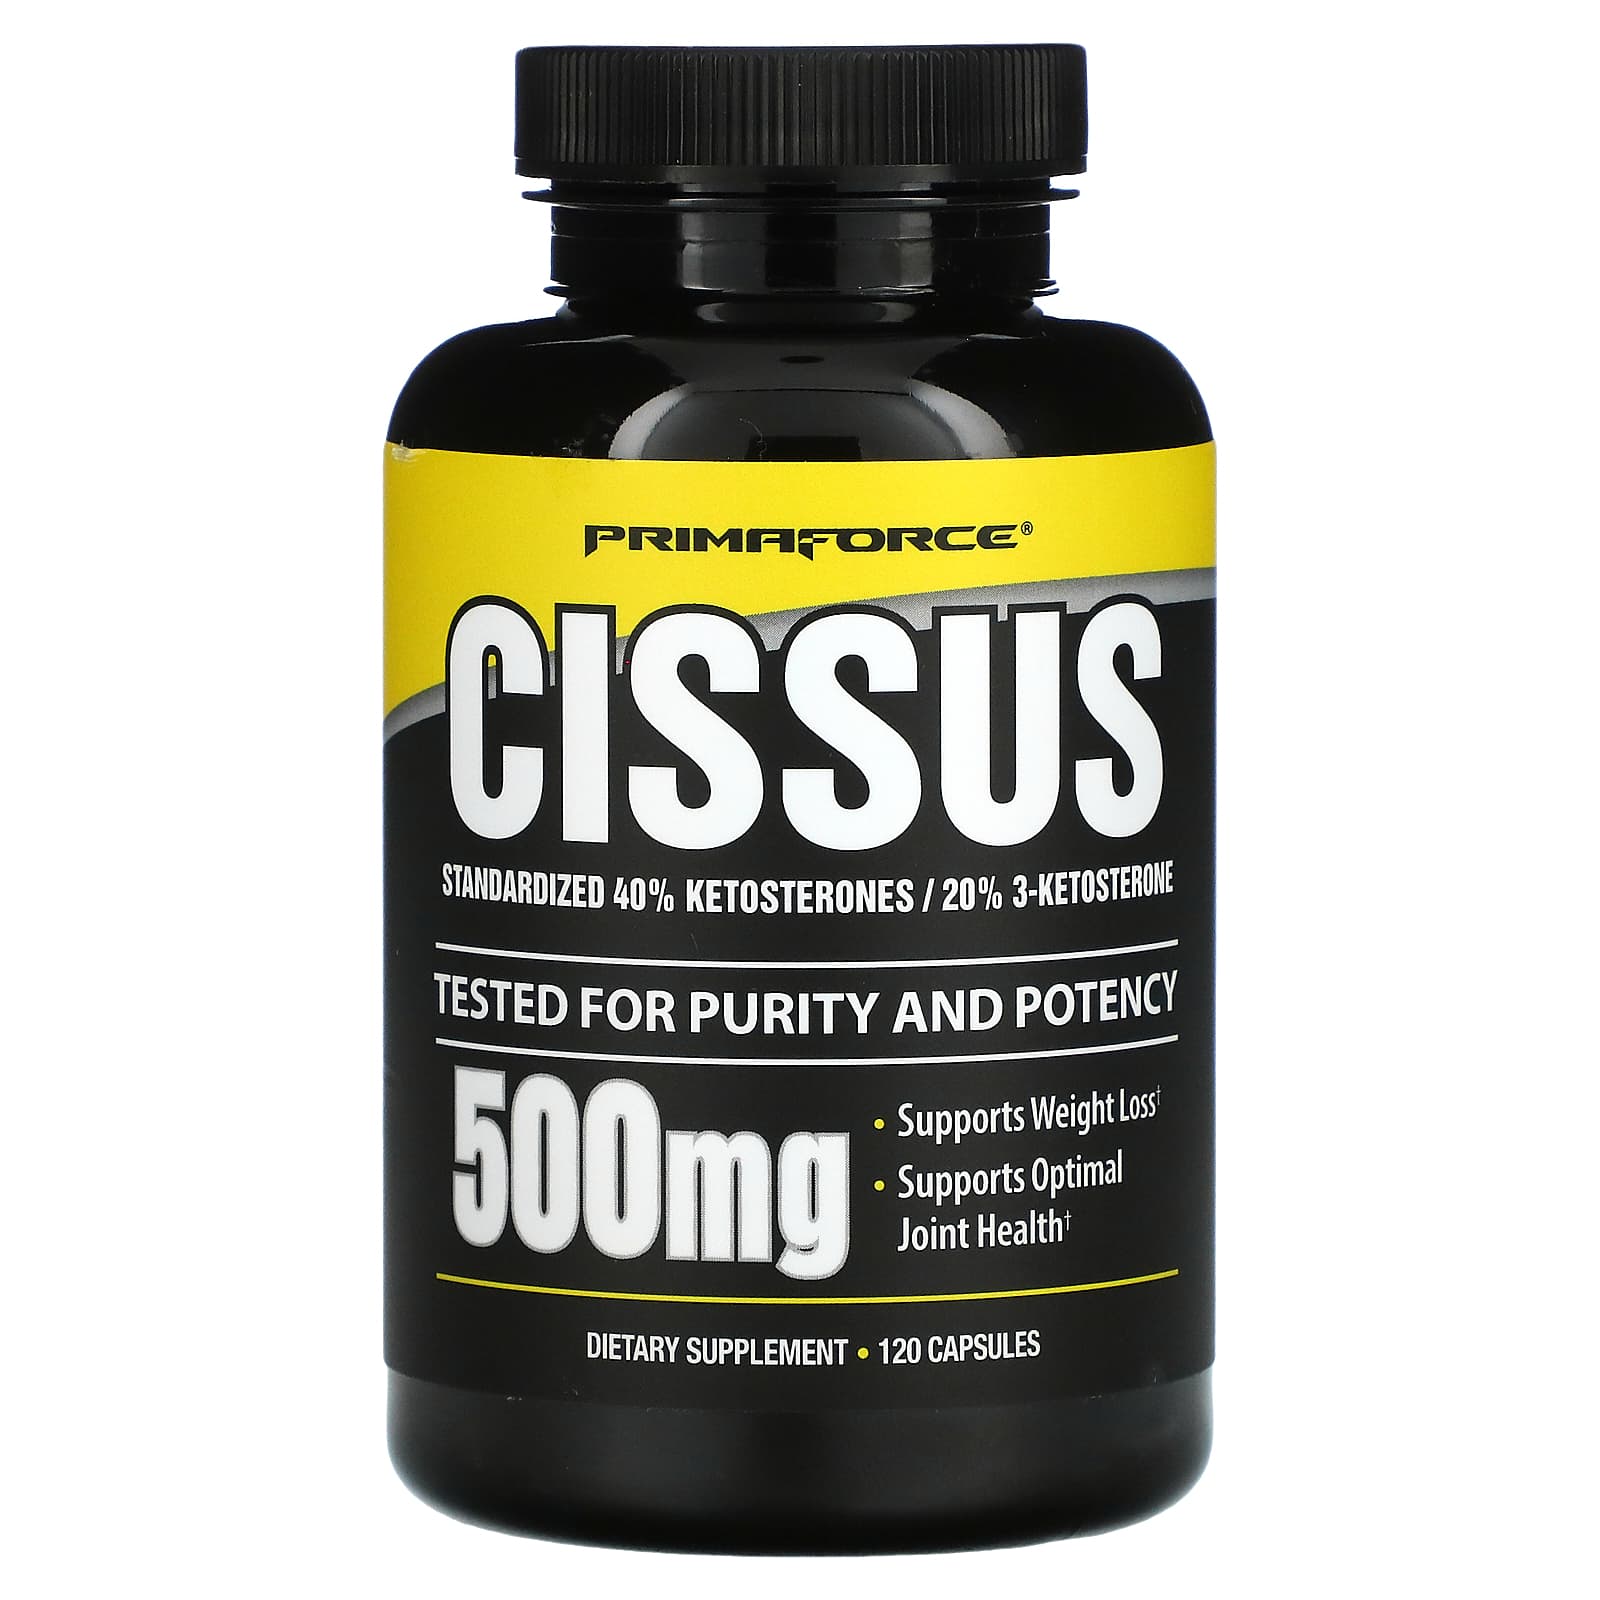 Supports Weight Loss... PrimaForce Cissus Supplement 120 Count 1000mg Capsules 